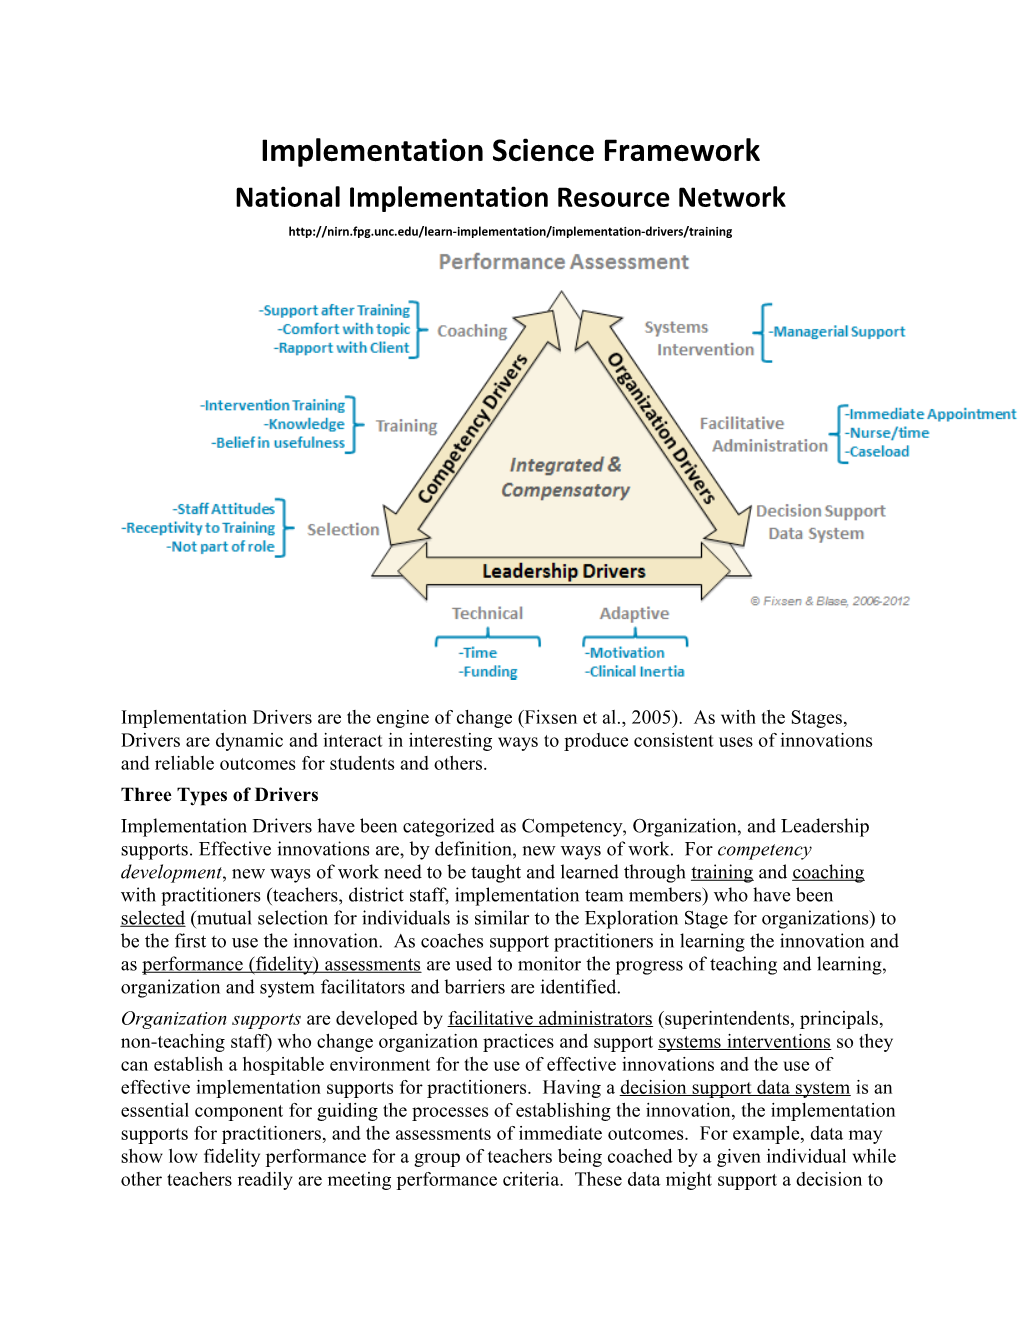 National Implementation Resource Network